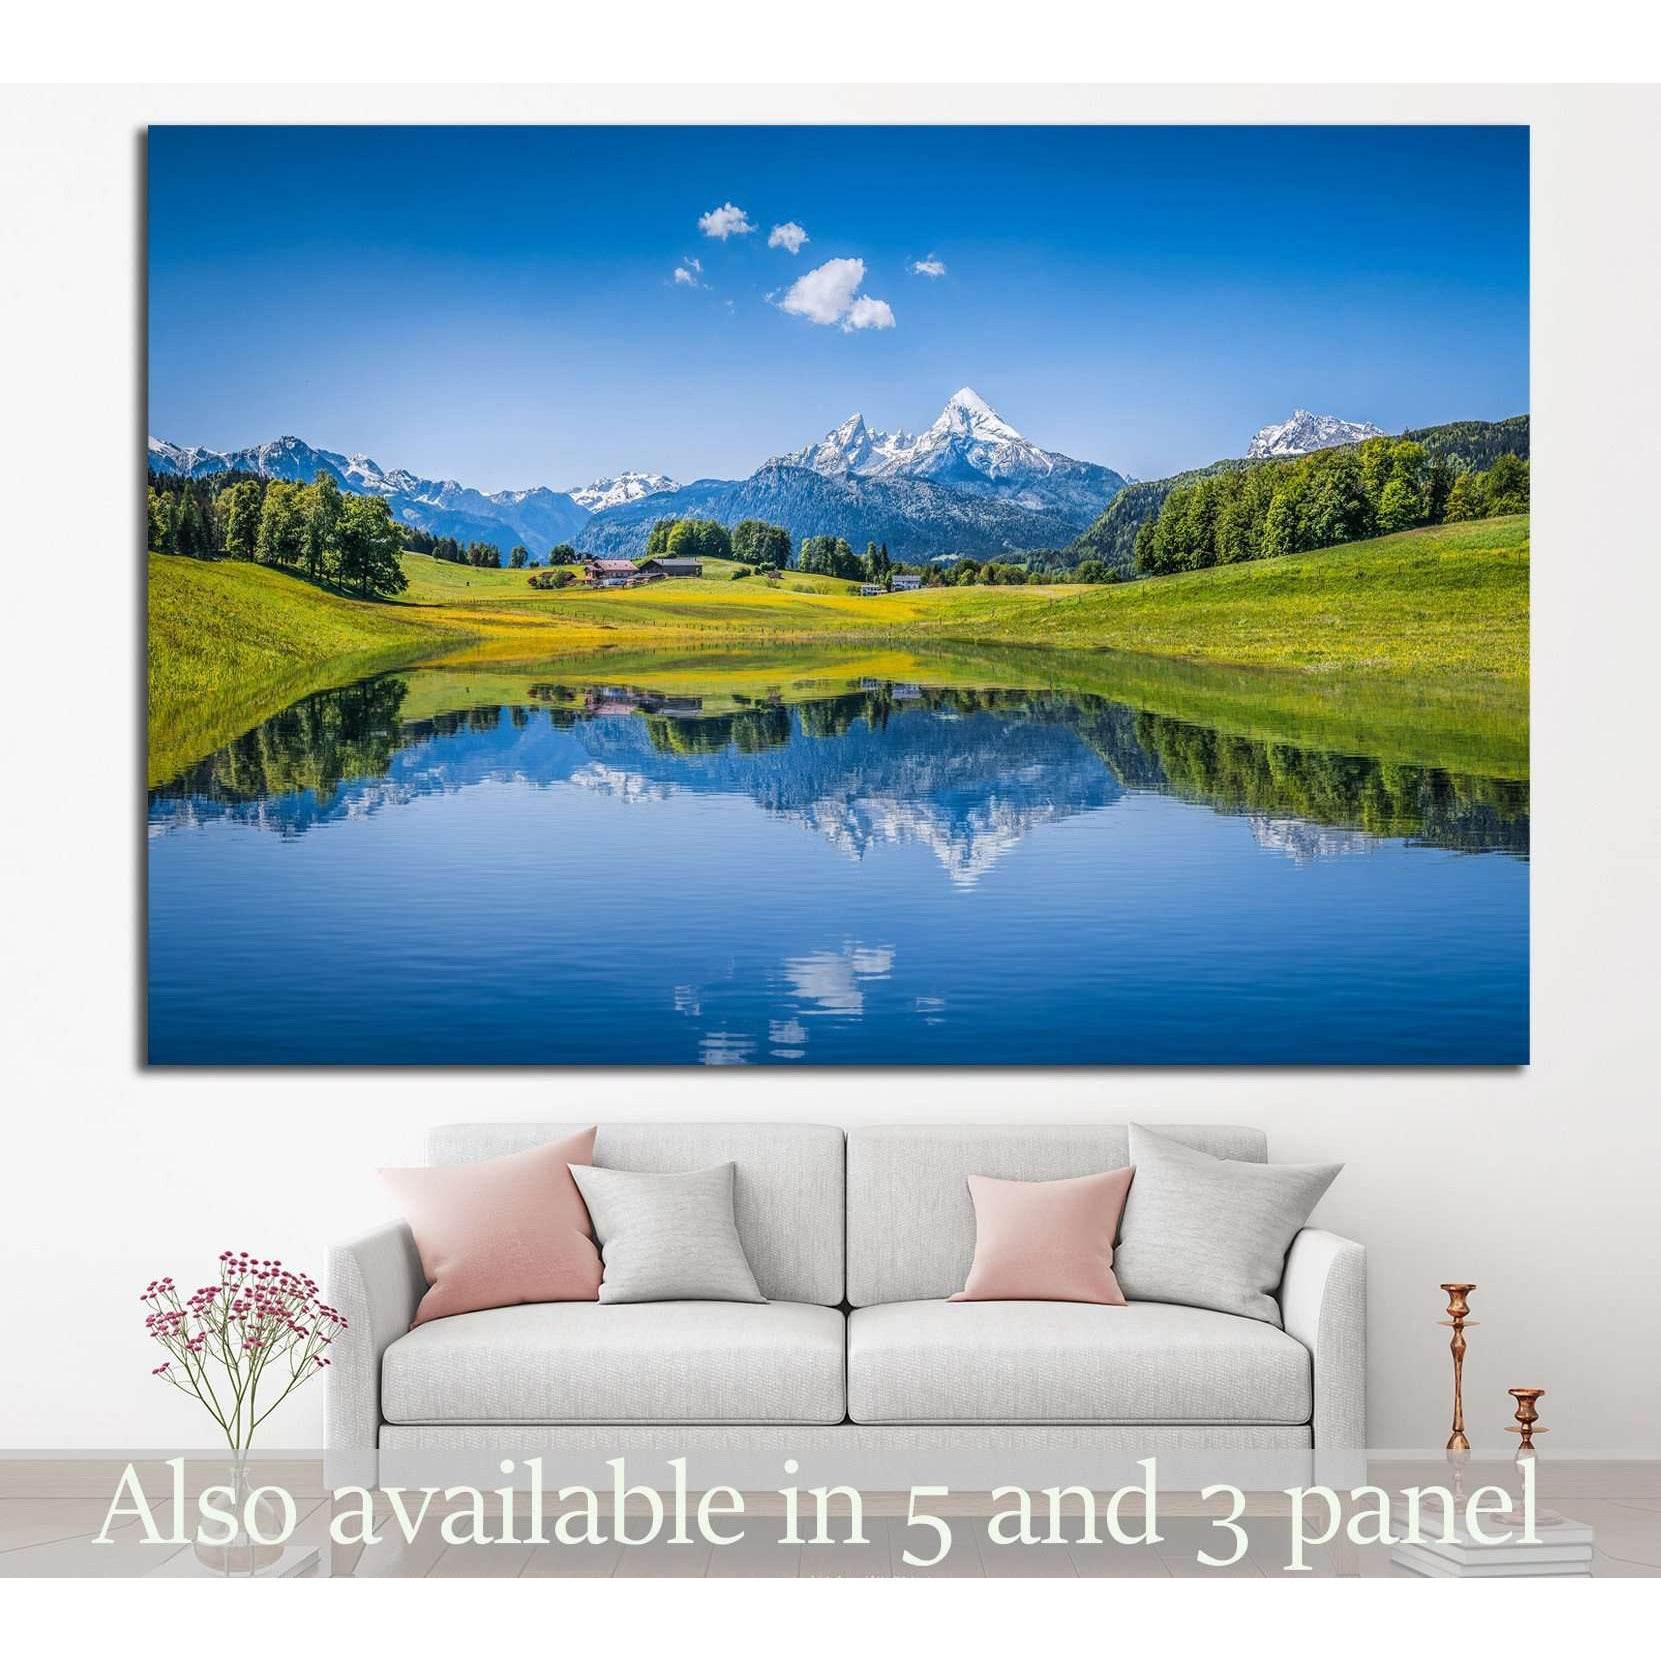 Alps with clear mountain lake №24 - canvas print wall art by Zellart